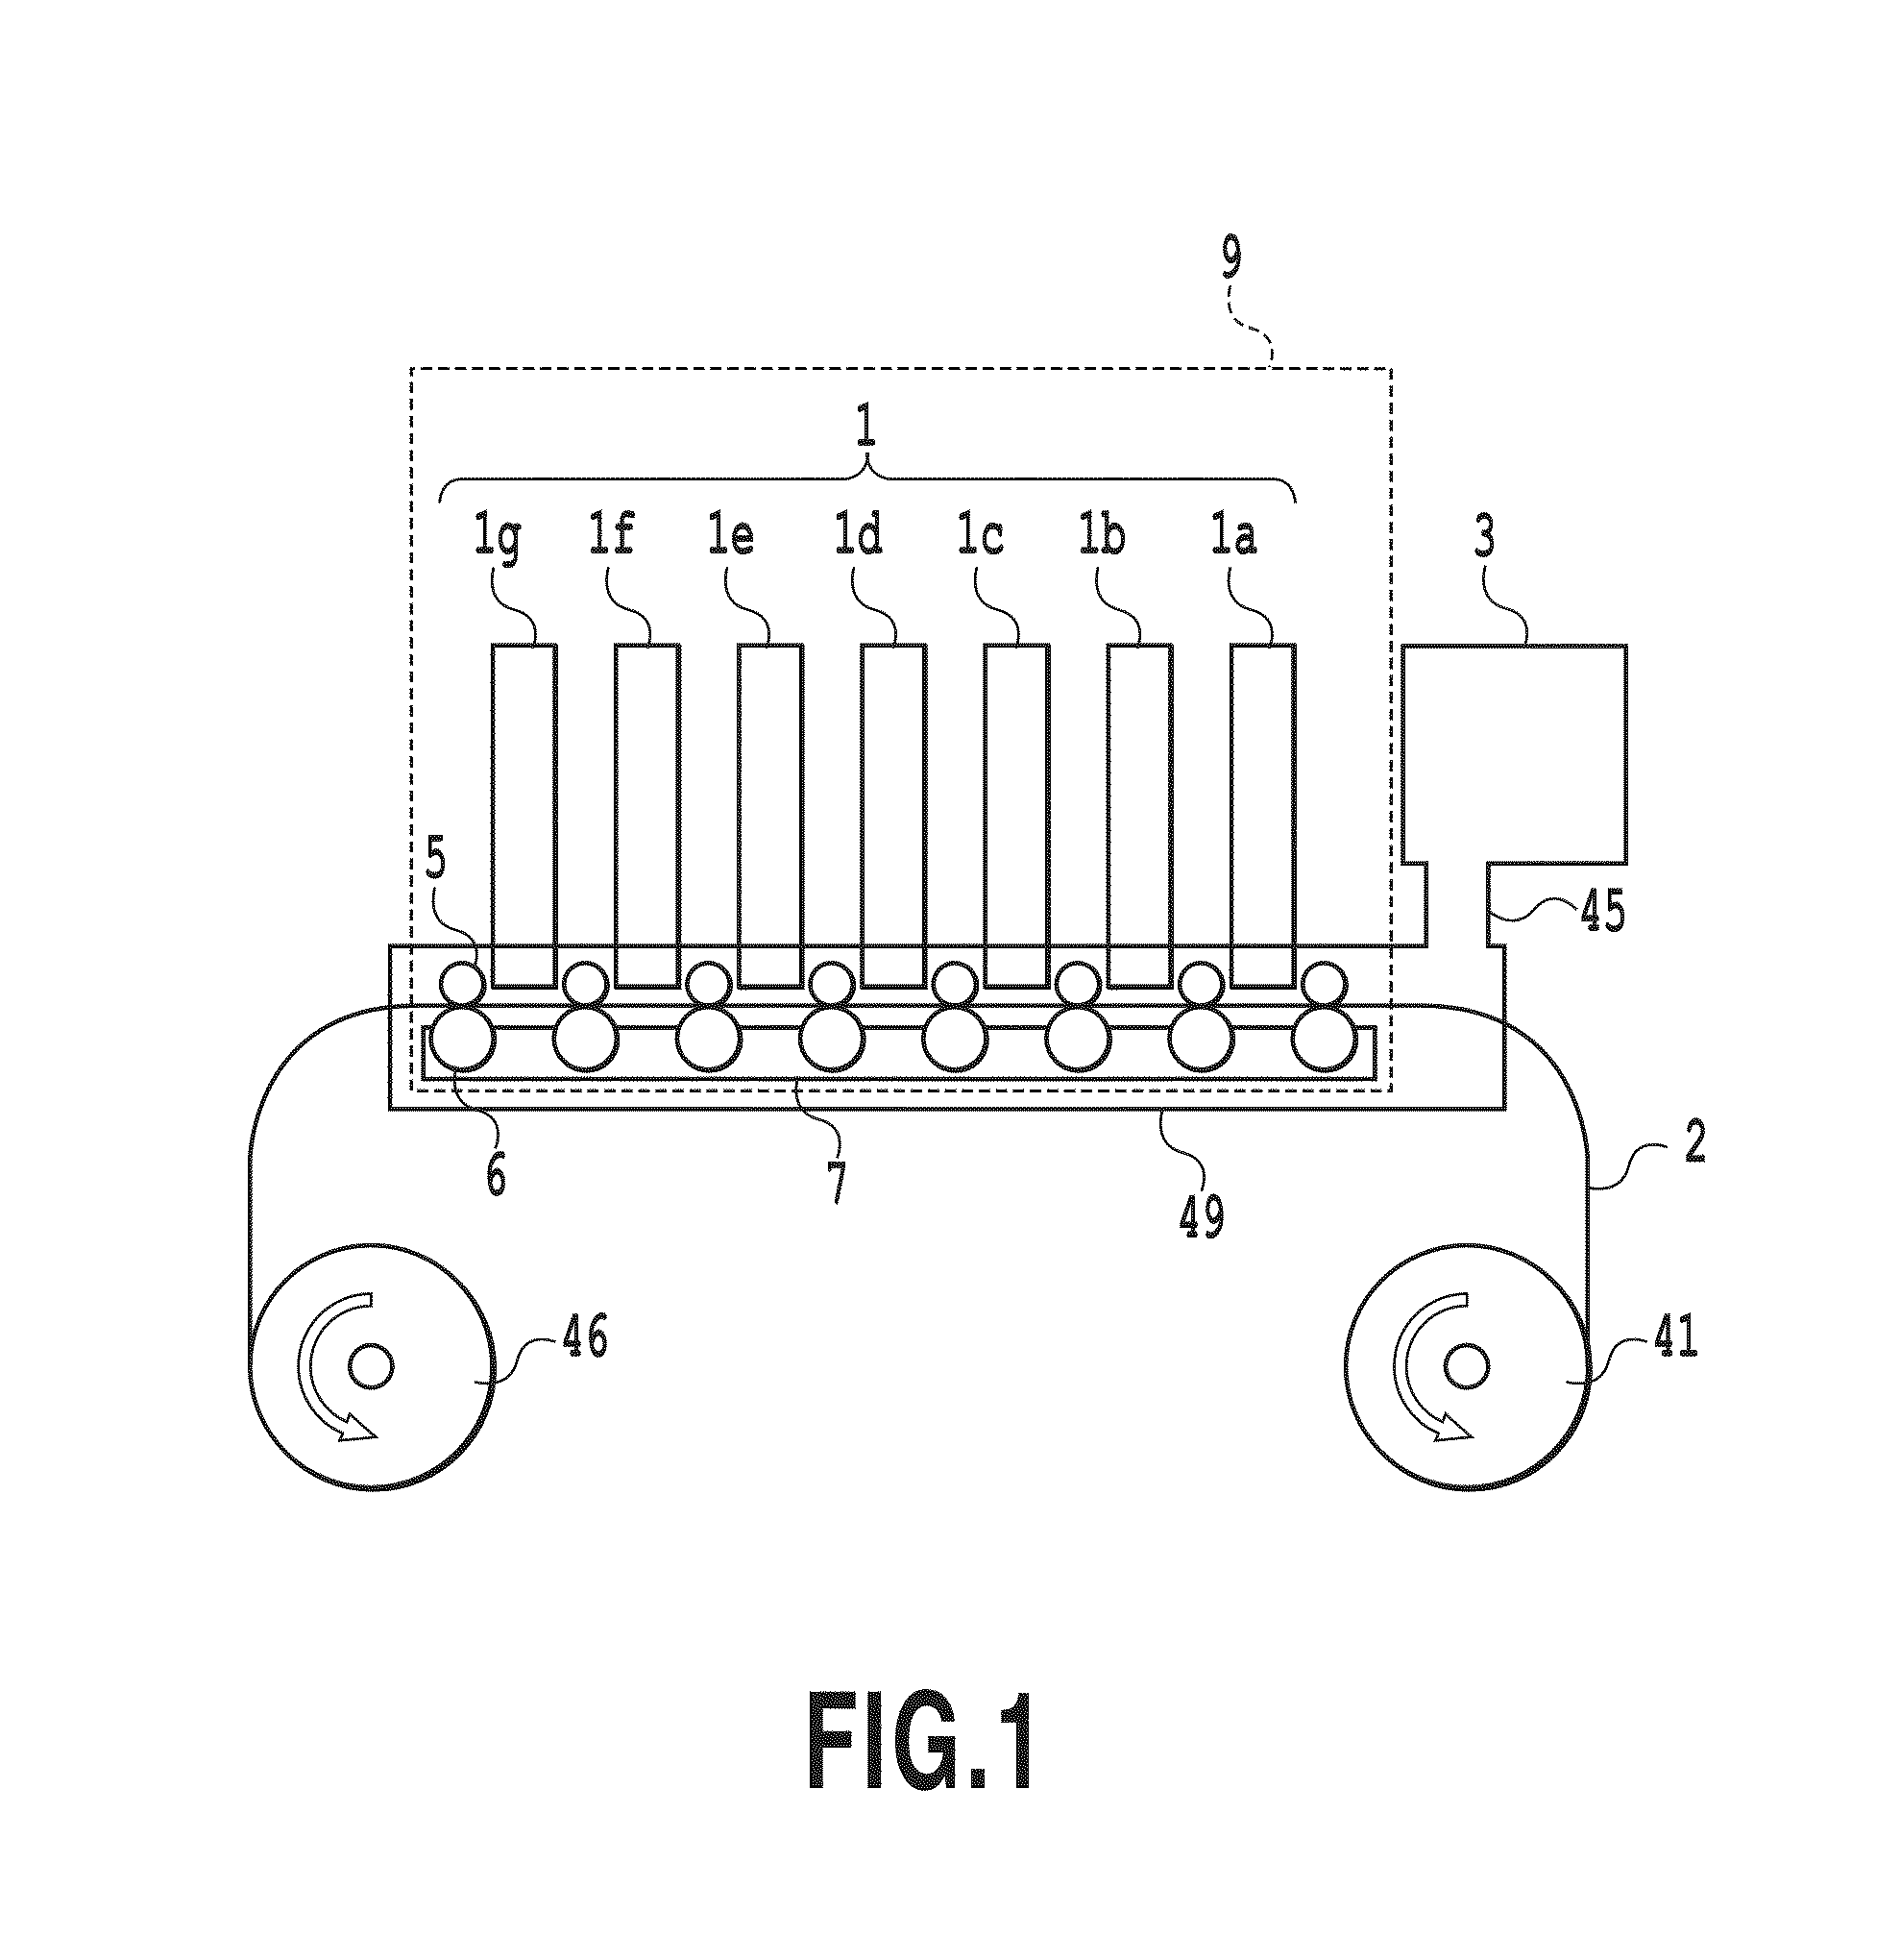 Inkjet printing apparatus with humidification unit